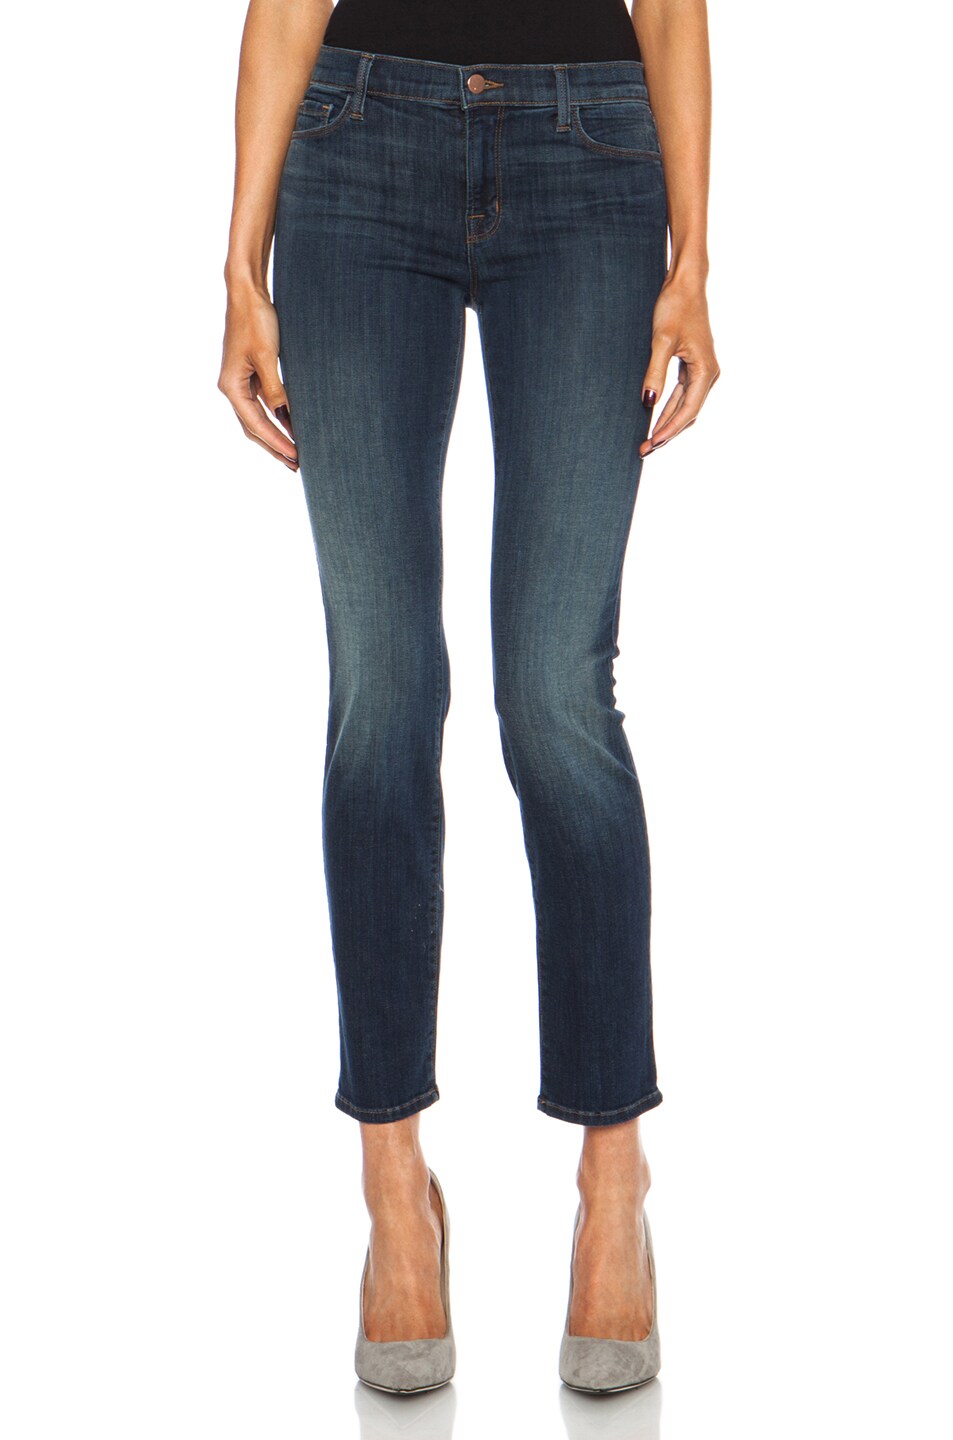 Image 1 of J Brand Mid-Rise Skinny Jean in Storm